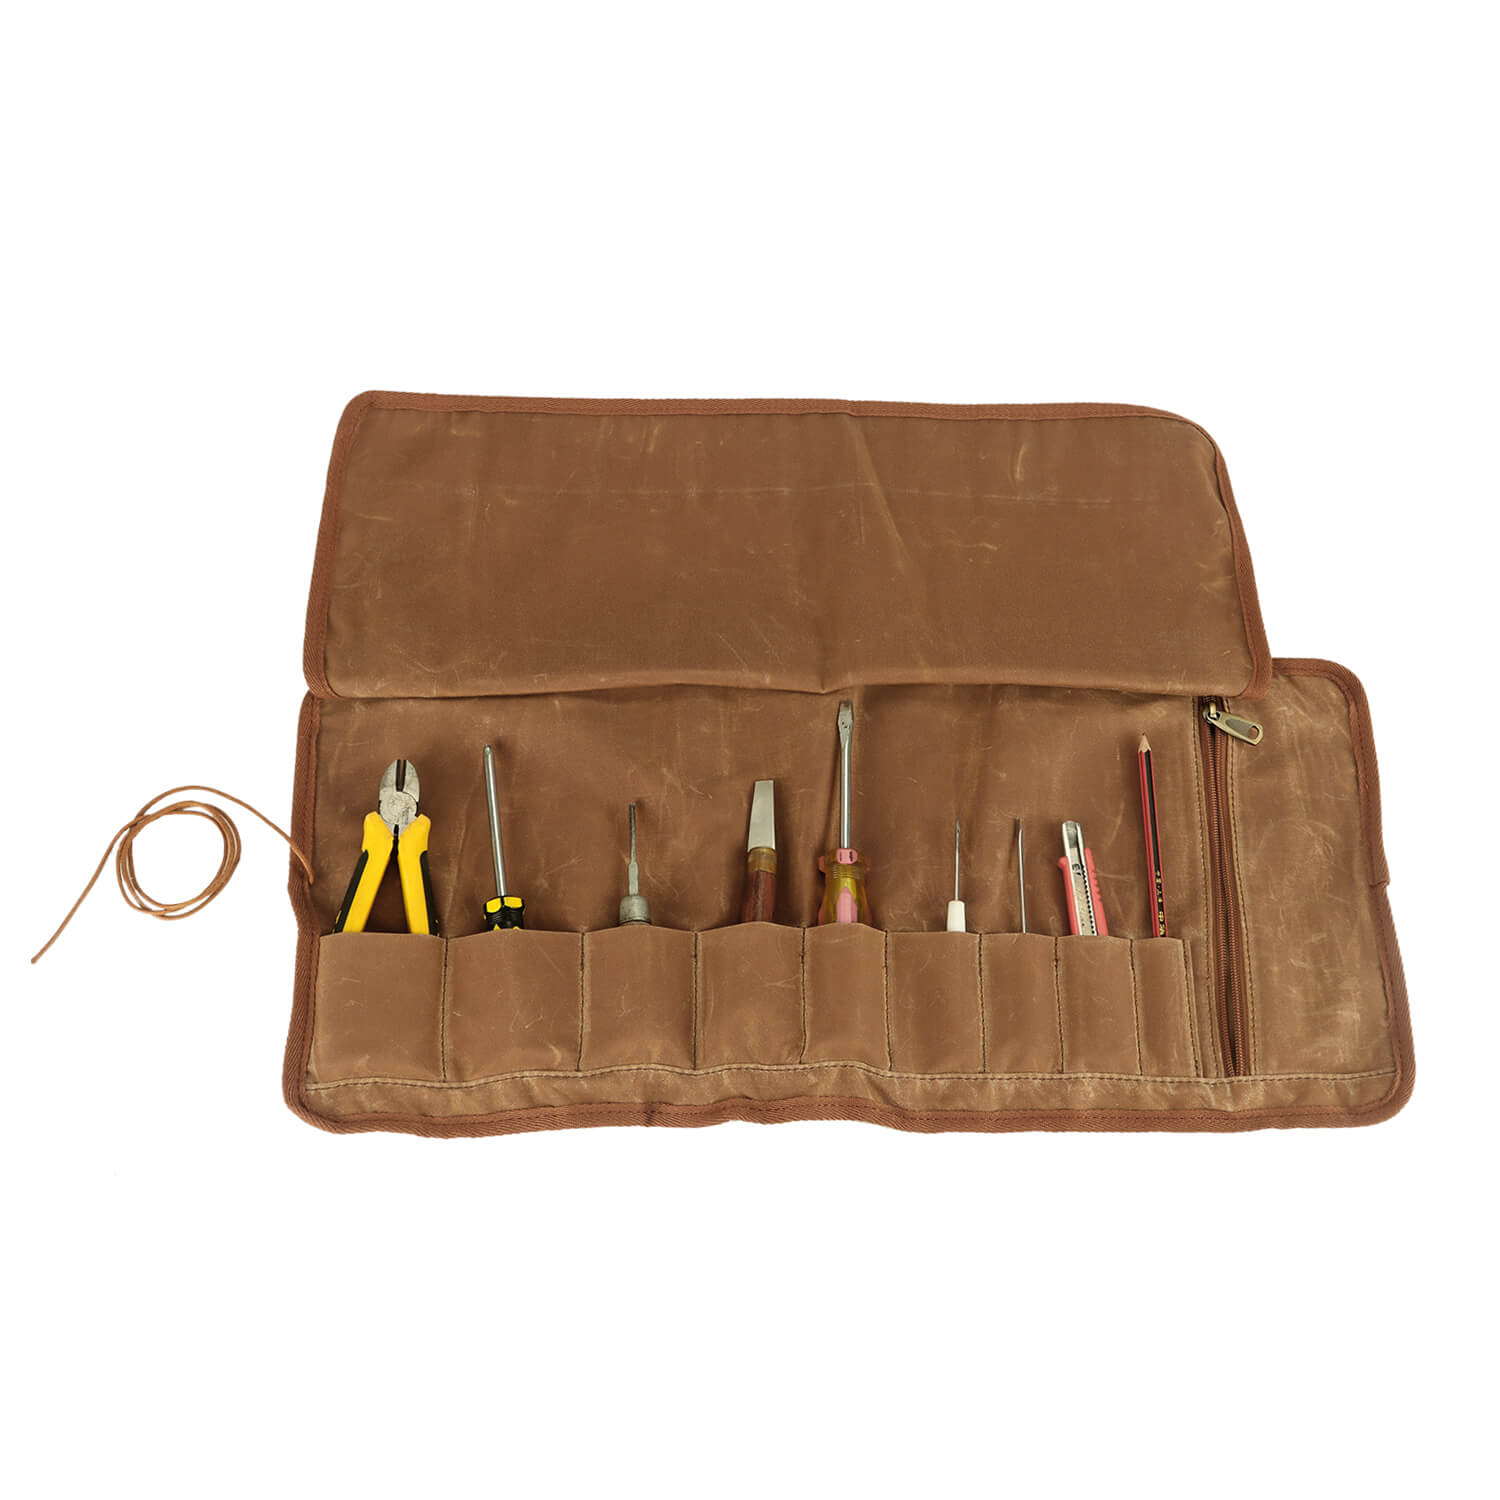 12 POCKET COMPARTMENT CANVAS TOOL ROLL STORAGE WALLET BAG Spanners Screwdriver 